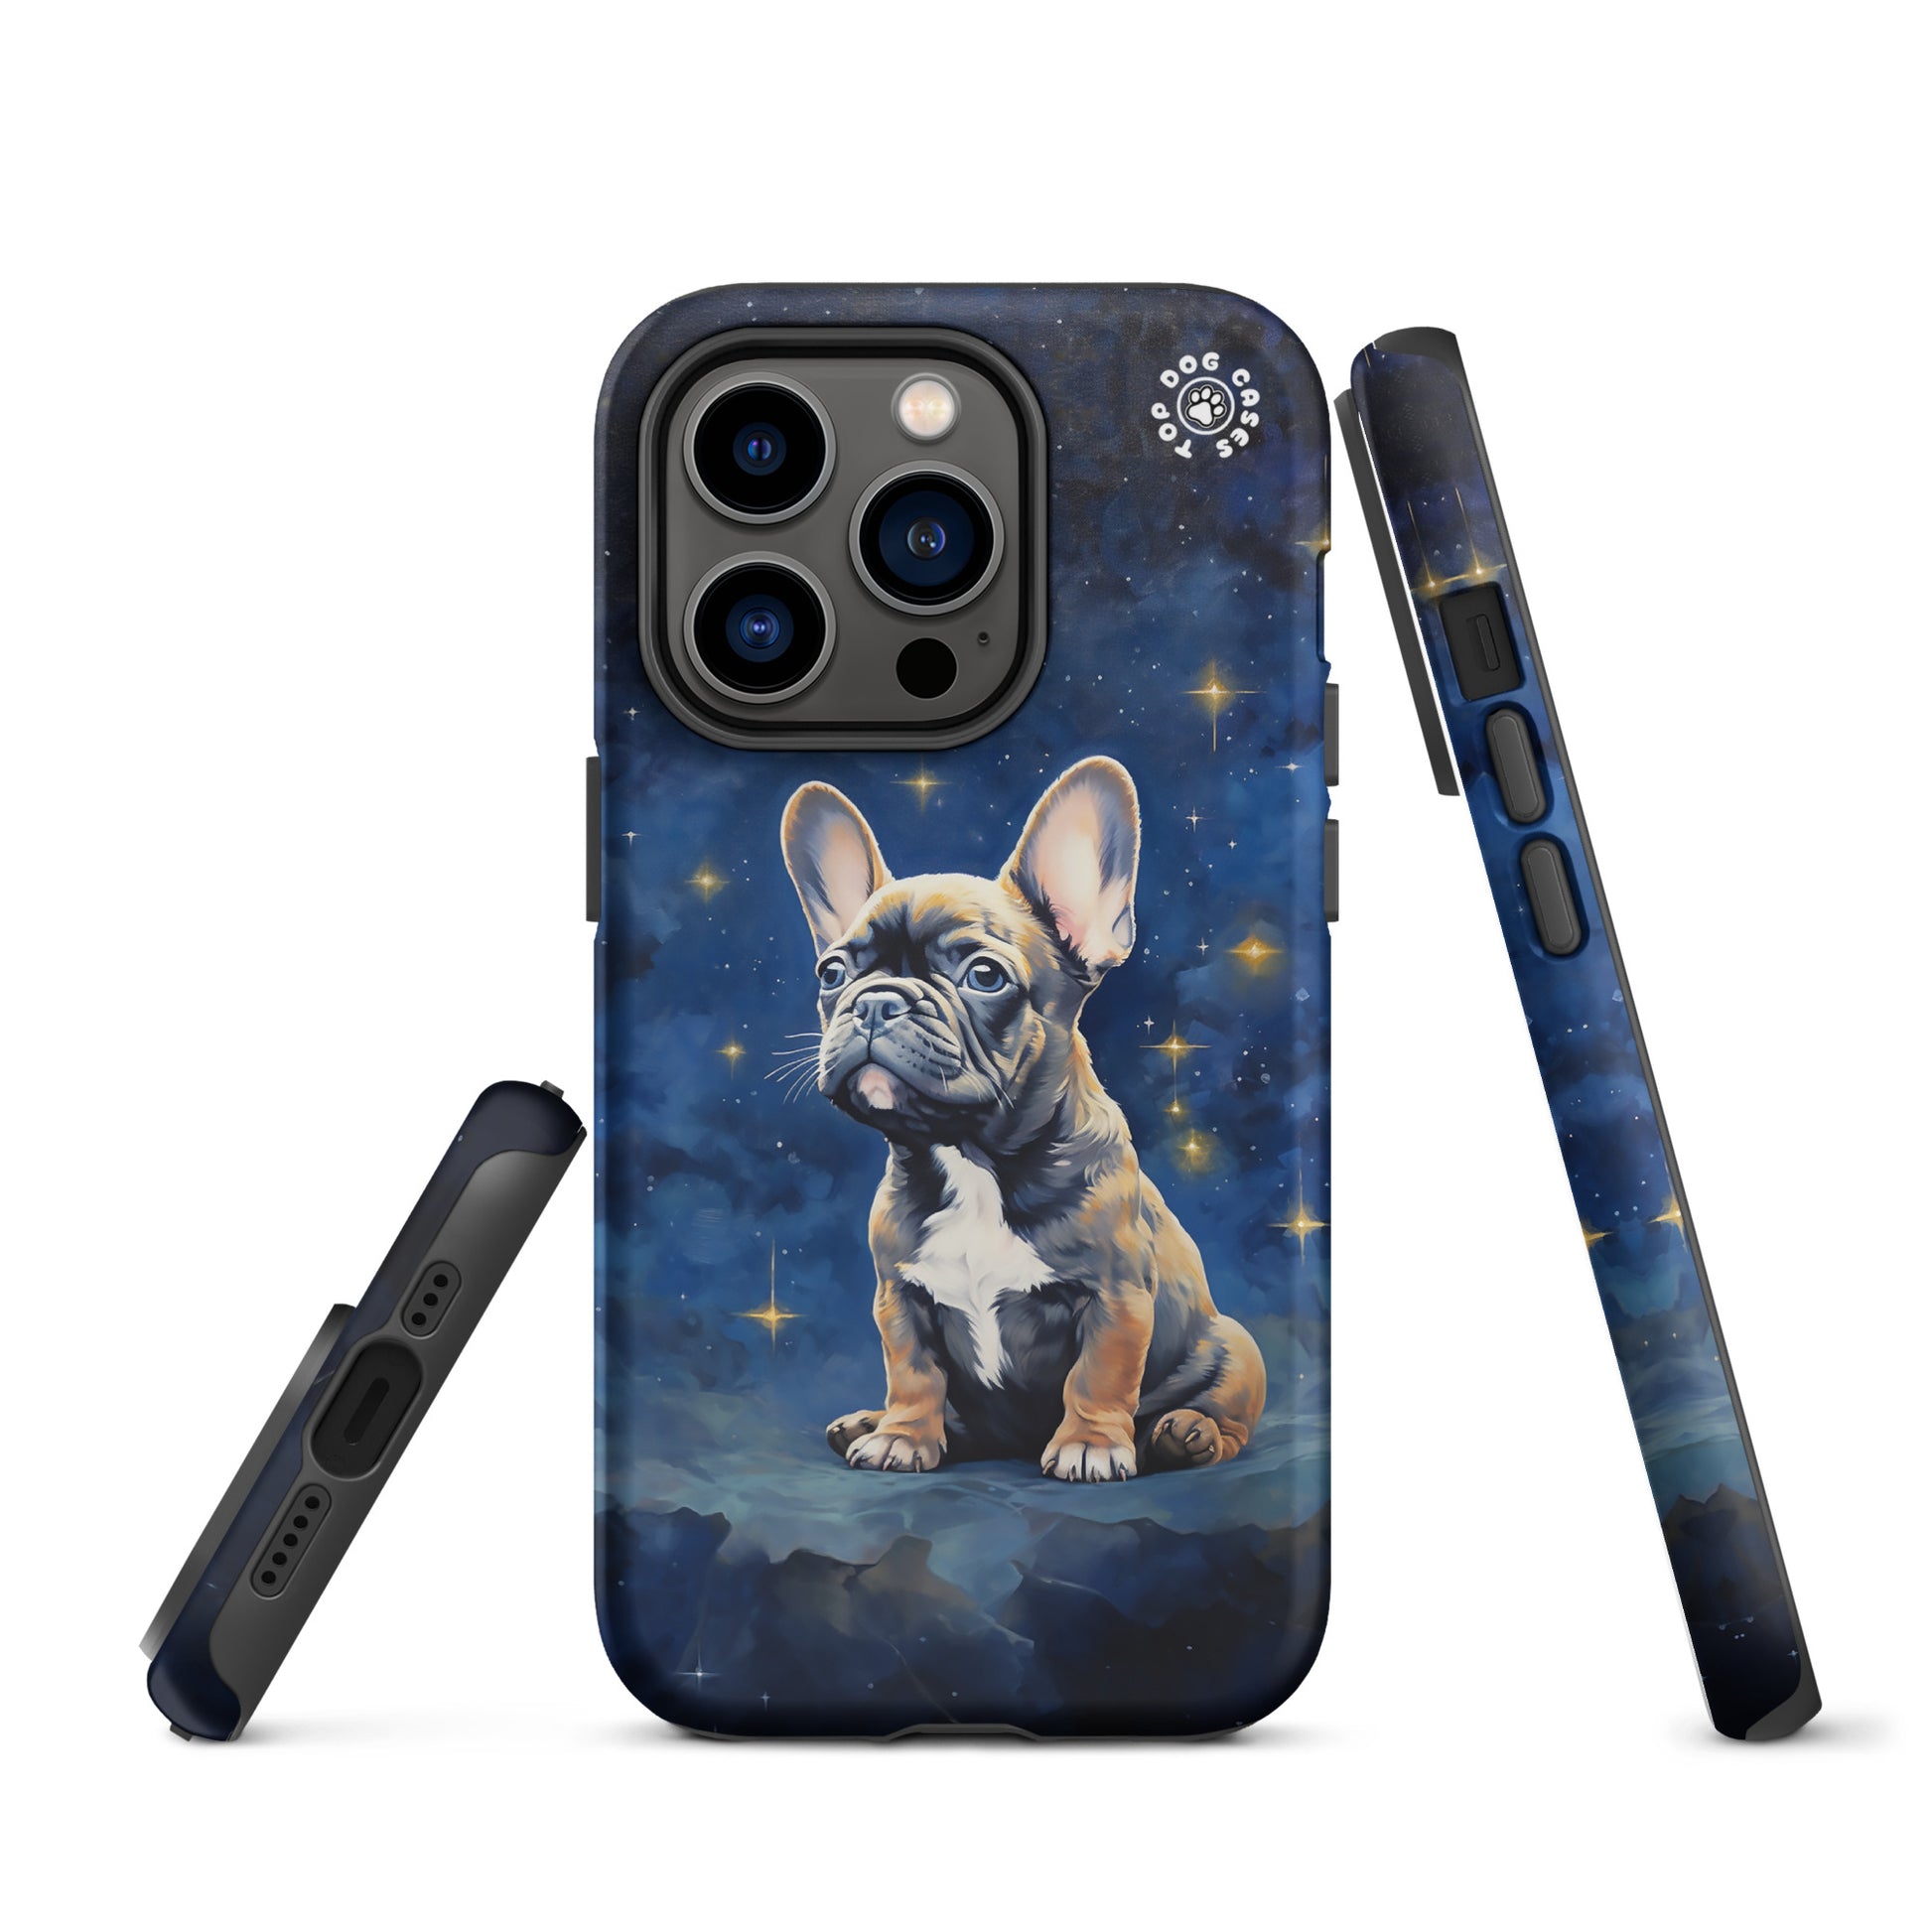 French Bulldog - iPhone 14 Case - Top Dog Cases - #CuteDog, #CuteDogs, #DogPhoneCase, #dogs, #French Bulldog, #FrenchBulldog, #iPhone, #iPhone14, #iPhone14case, #iPhone14DogCase, #iPhone14Plus, #iPhone14Pluscase, #iPhone14Pro, #iPhone14ProMax, #iPhone14ProMaxCase, #iphonedogcase